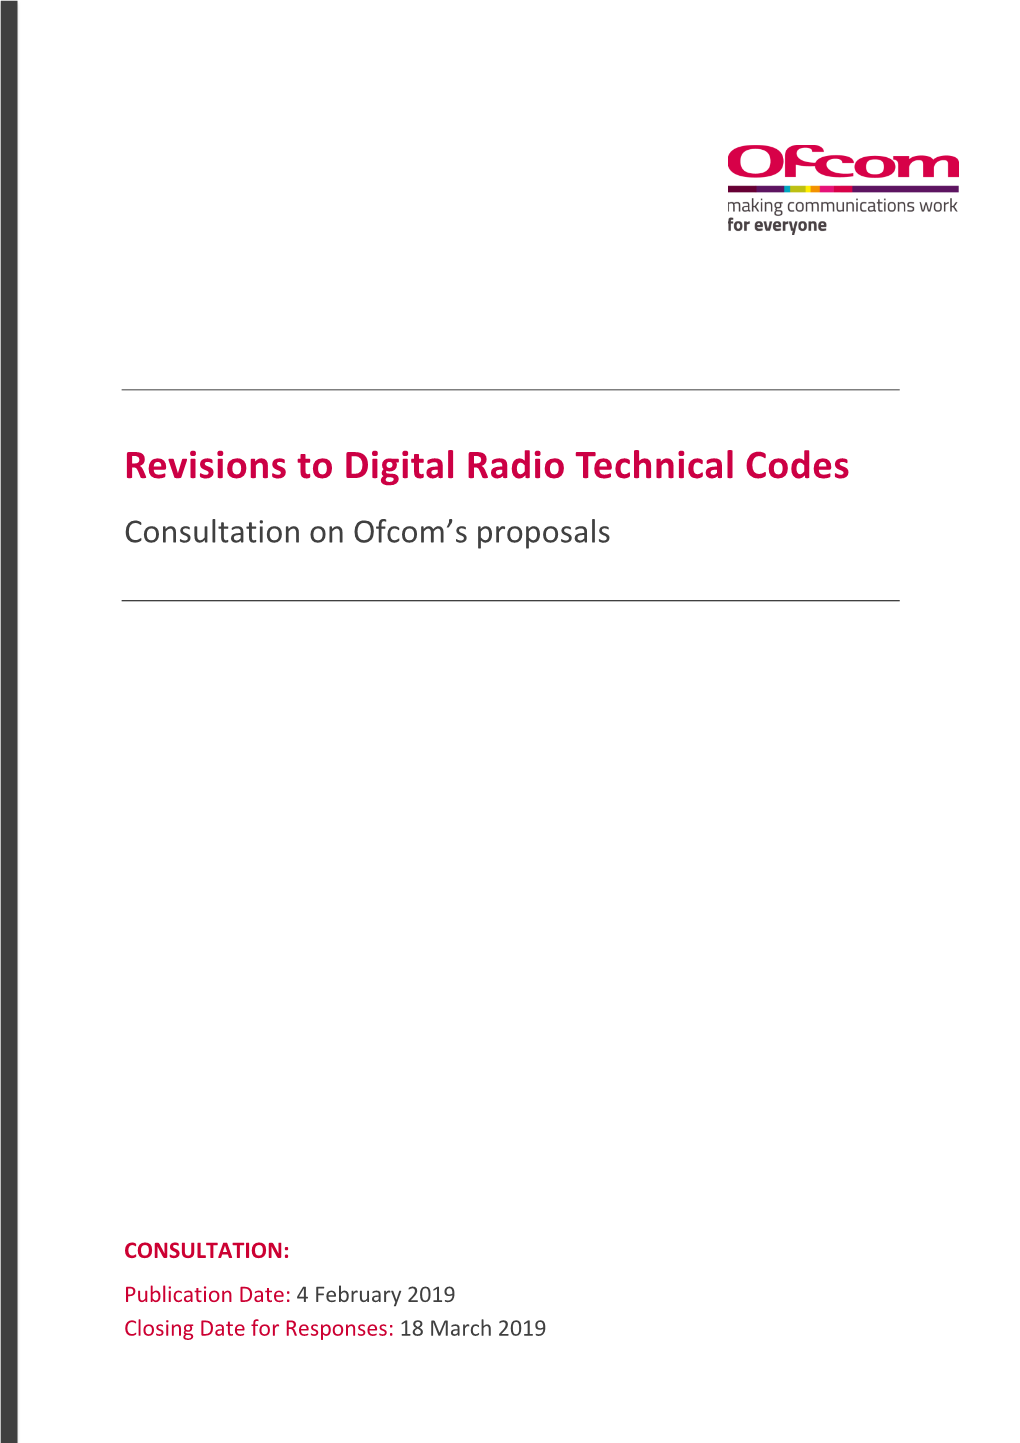 Consultation: Revisions to Digital Radio Technical Codes